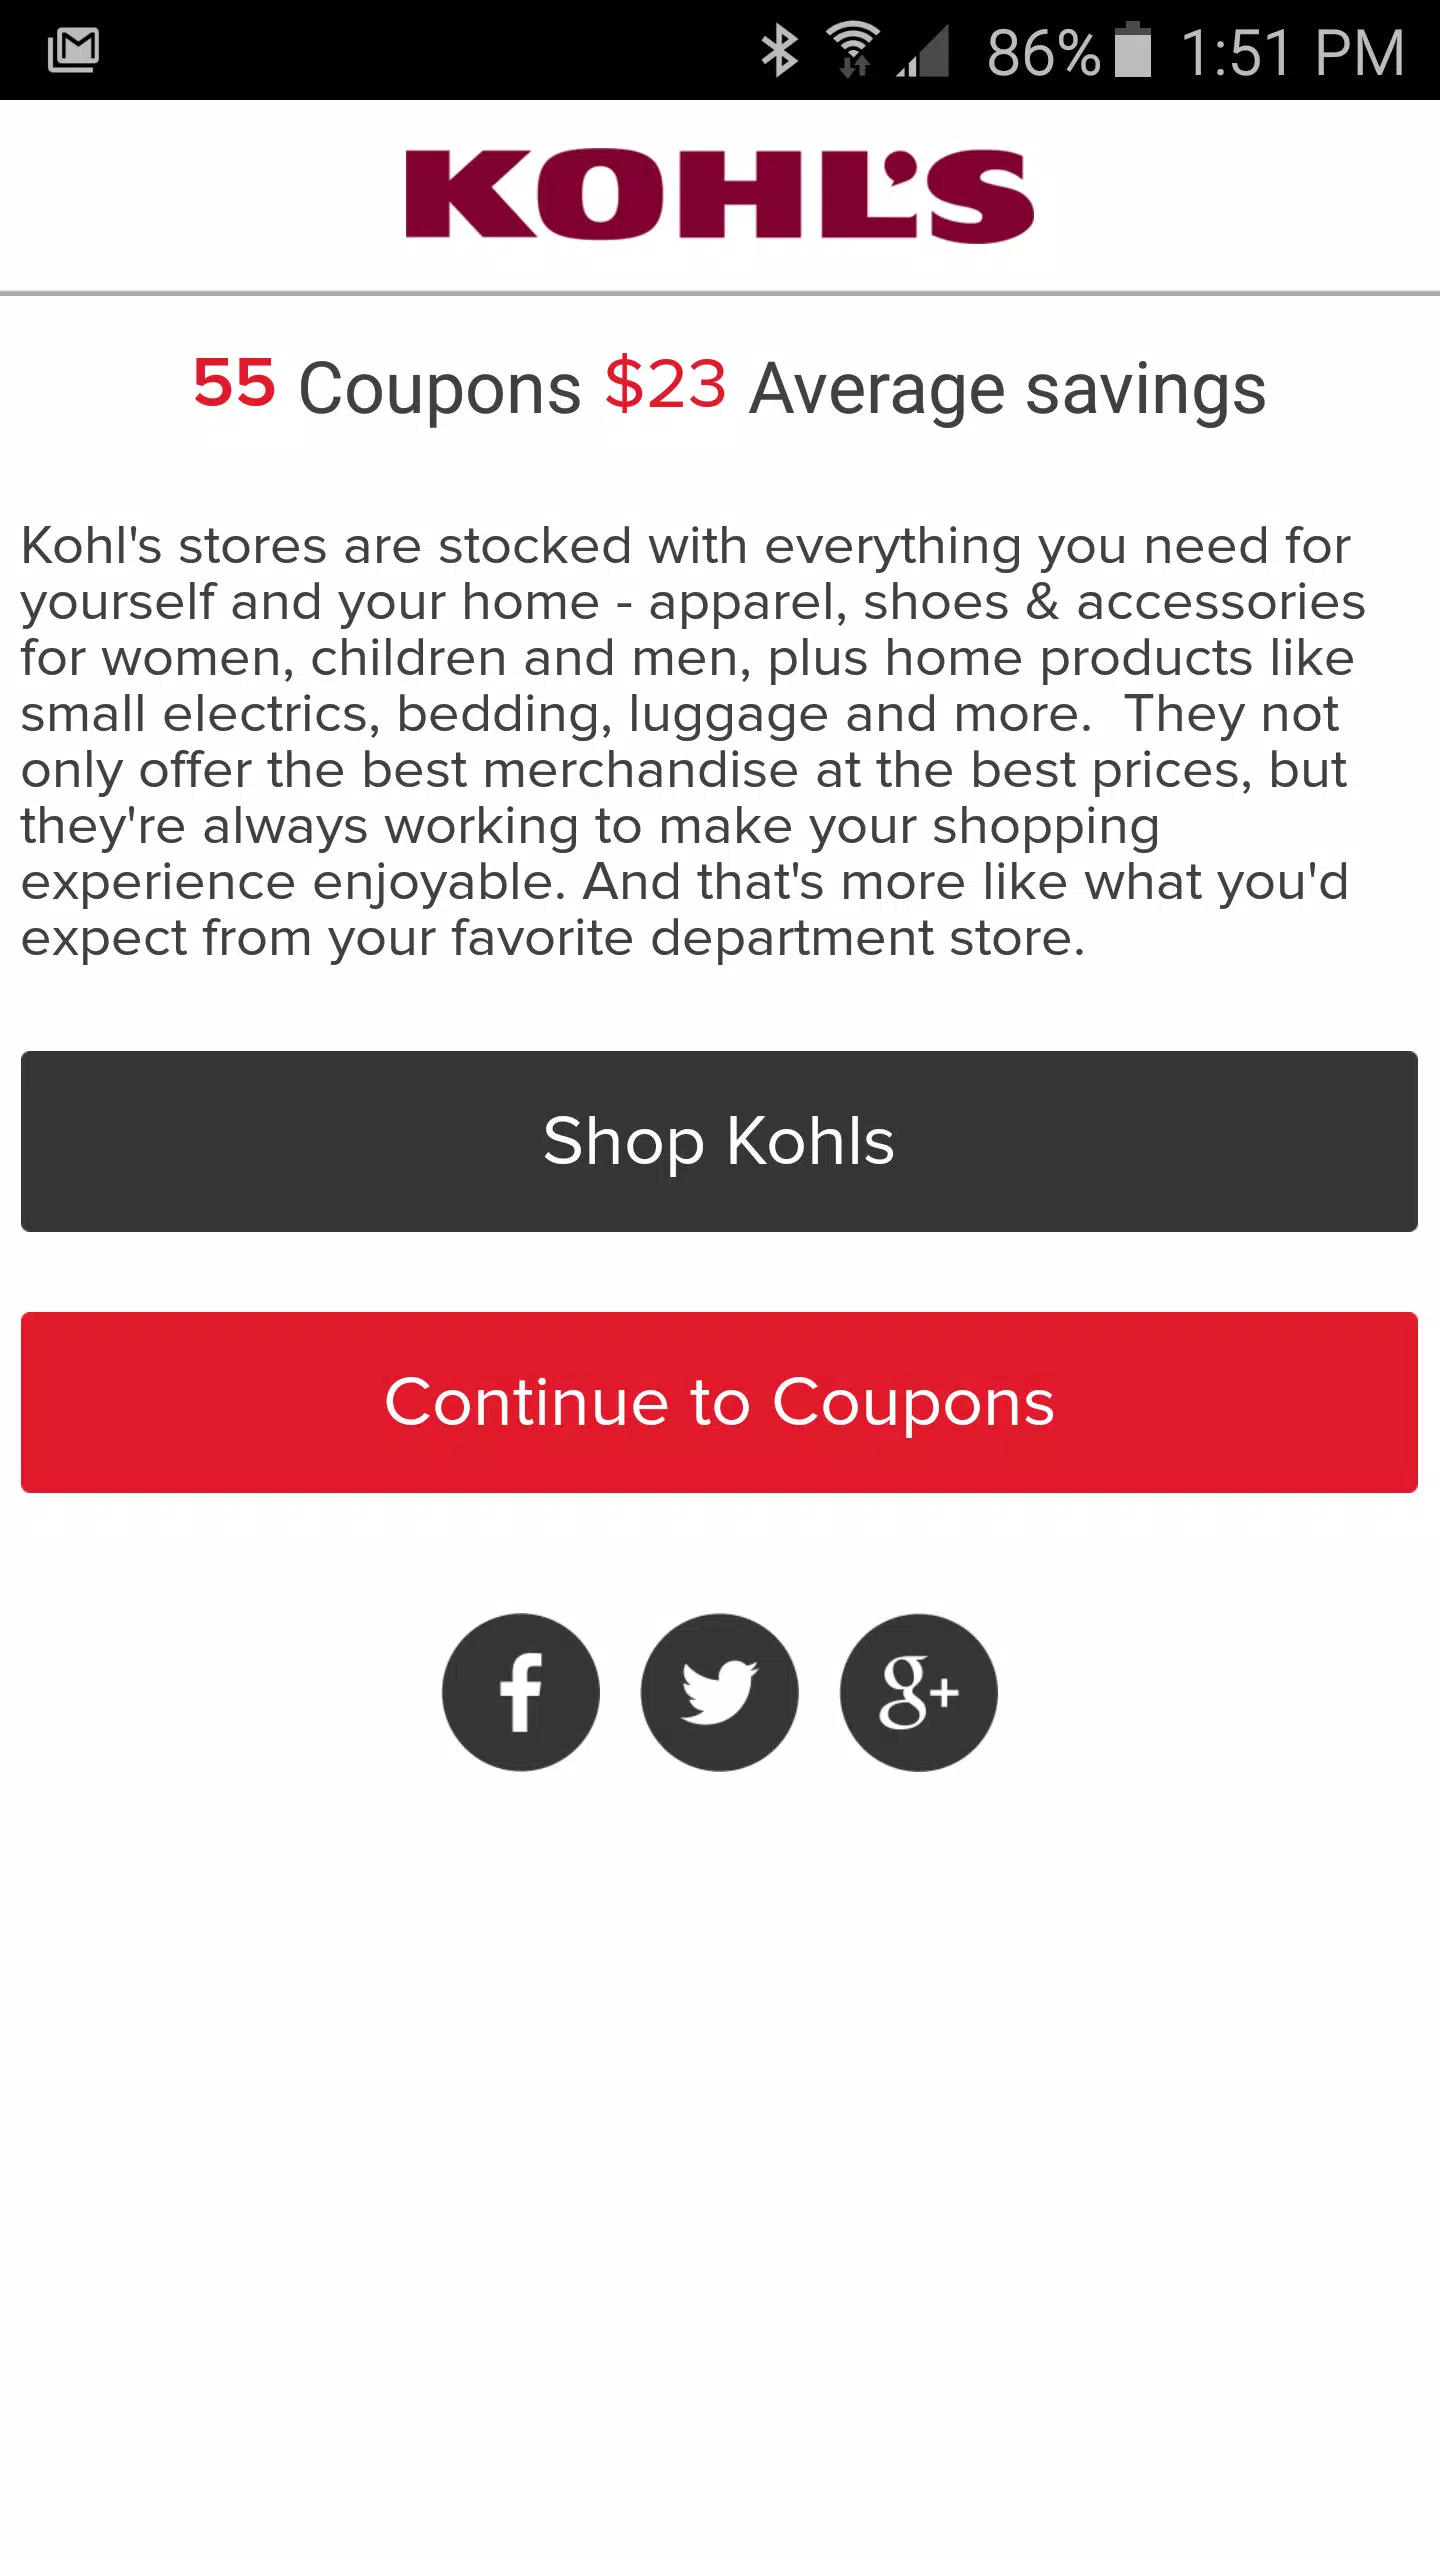 Kohl's - Shopping & Discounts - APK Download for Android